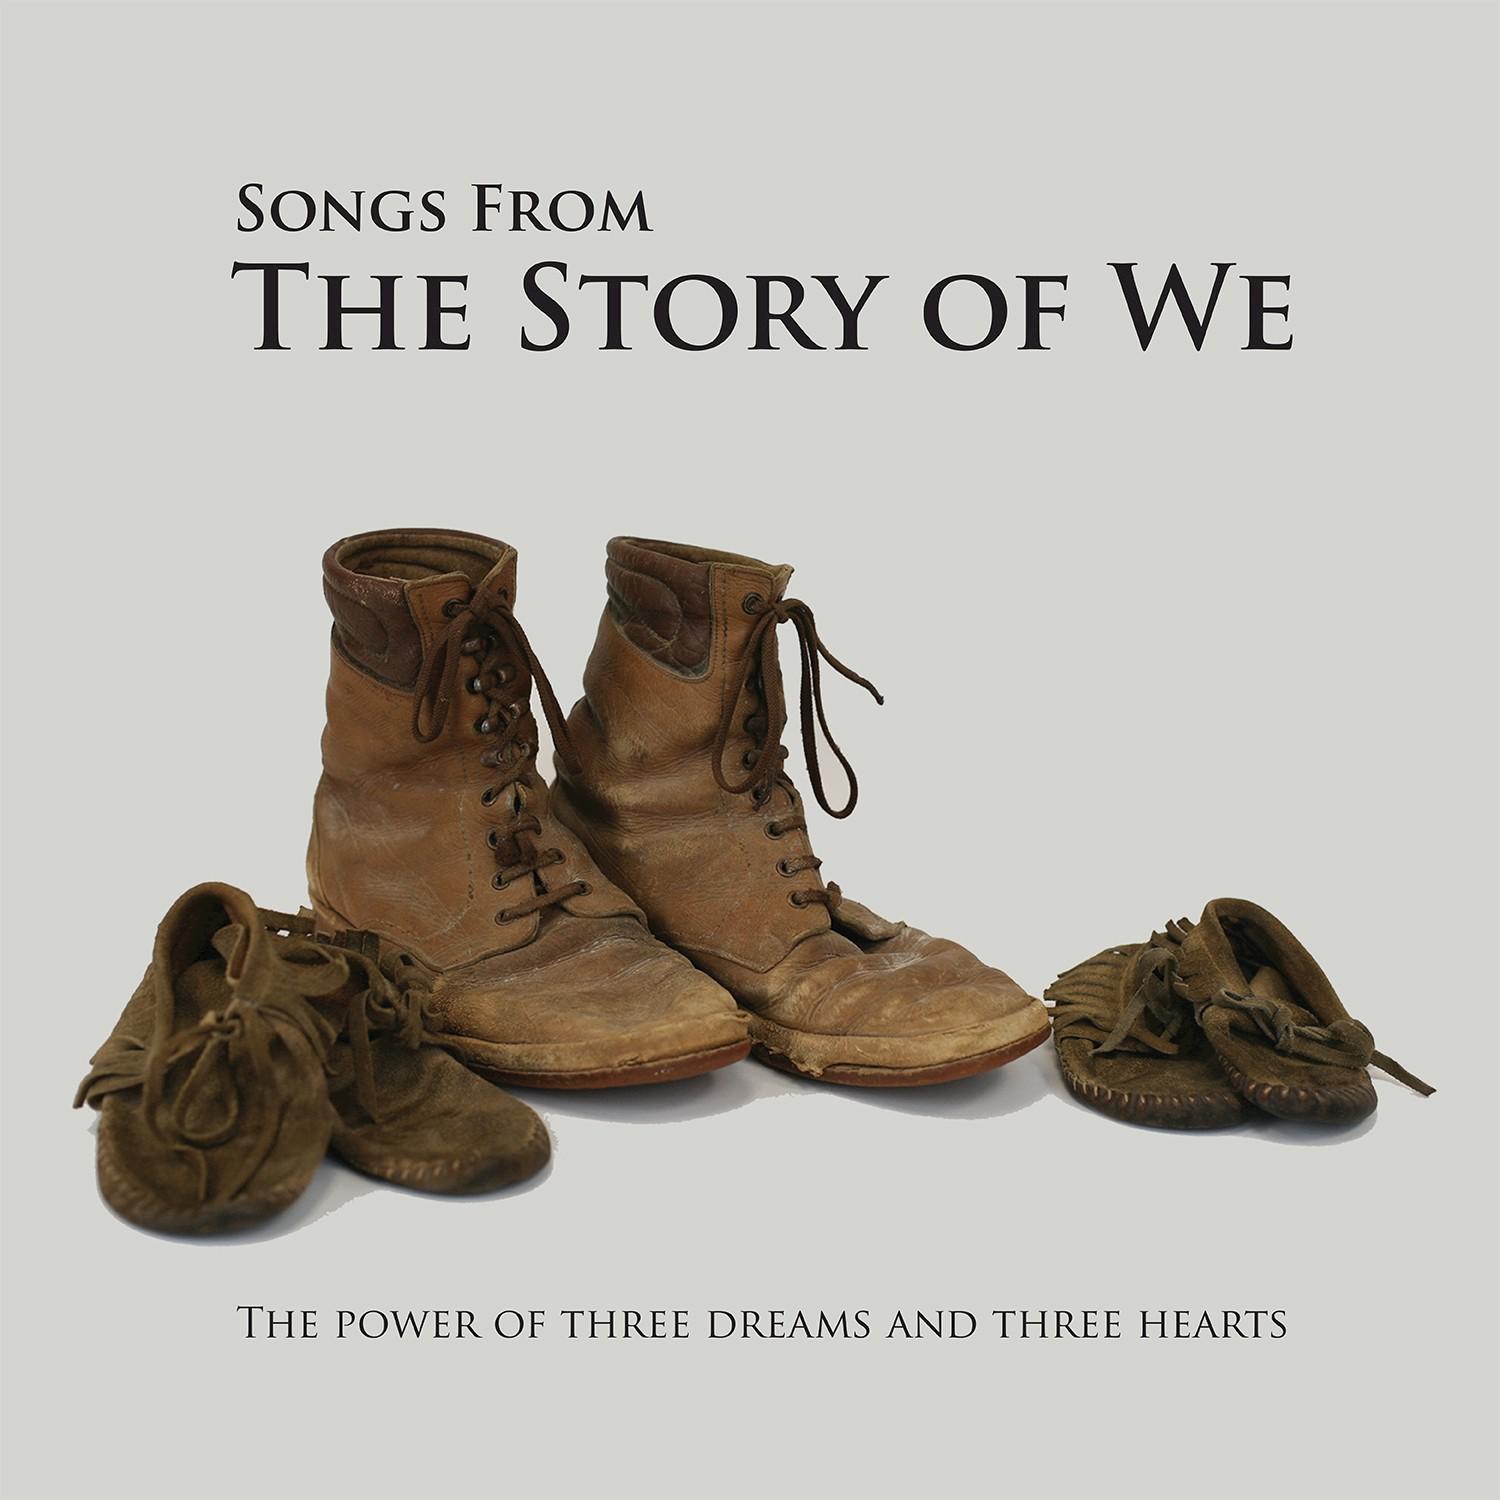 Songs from the Story of We